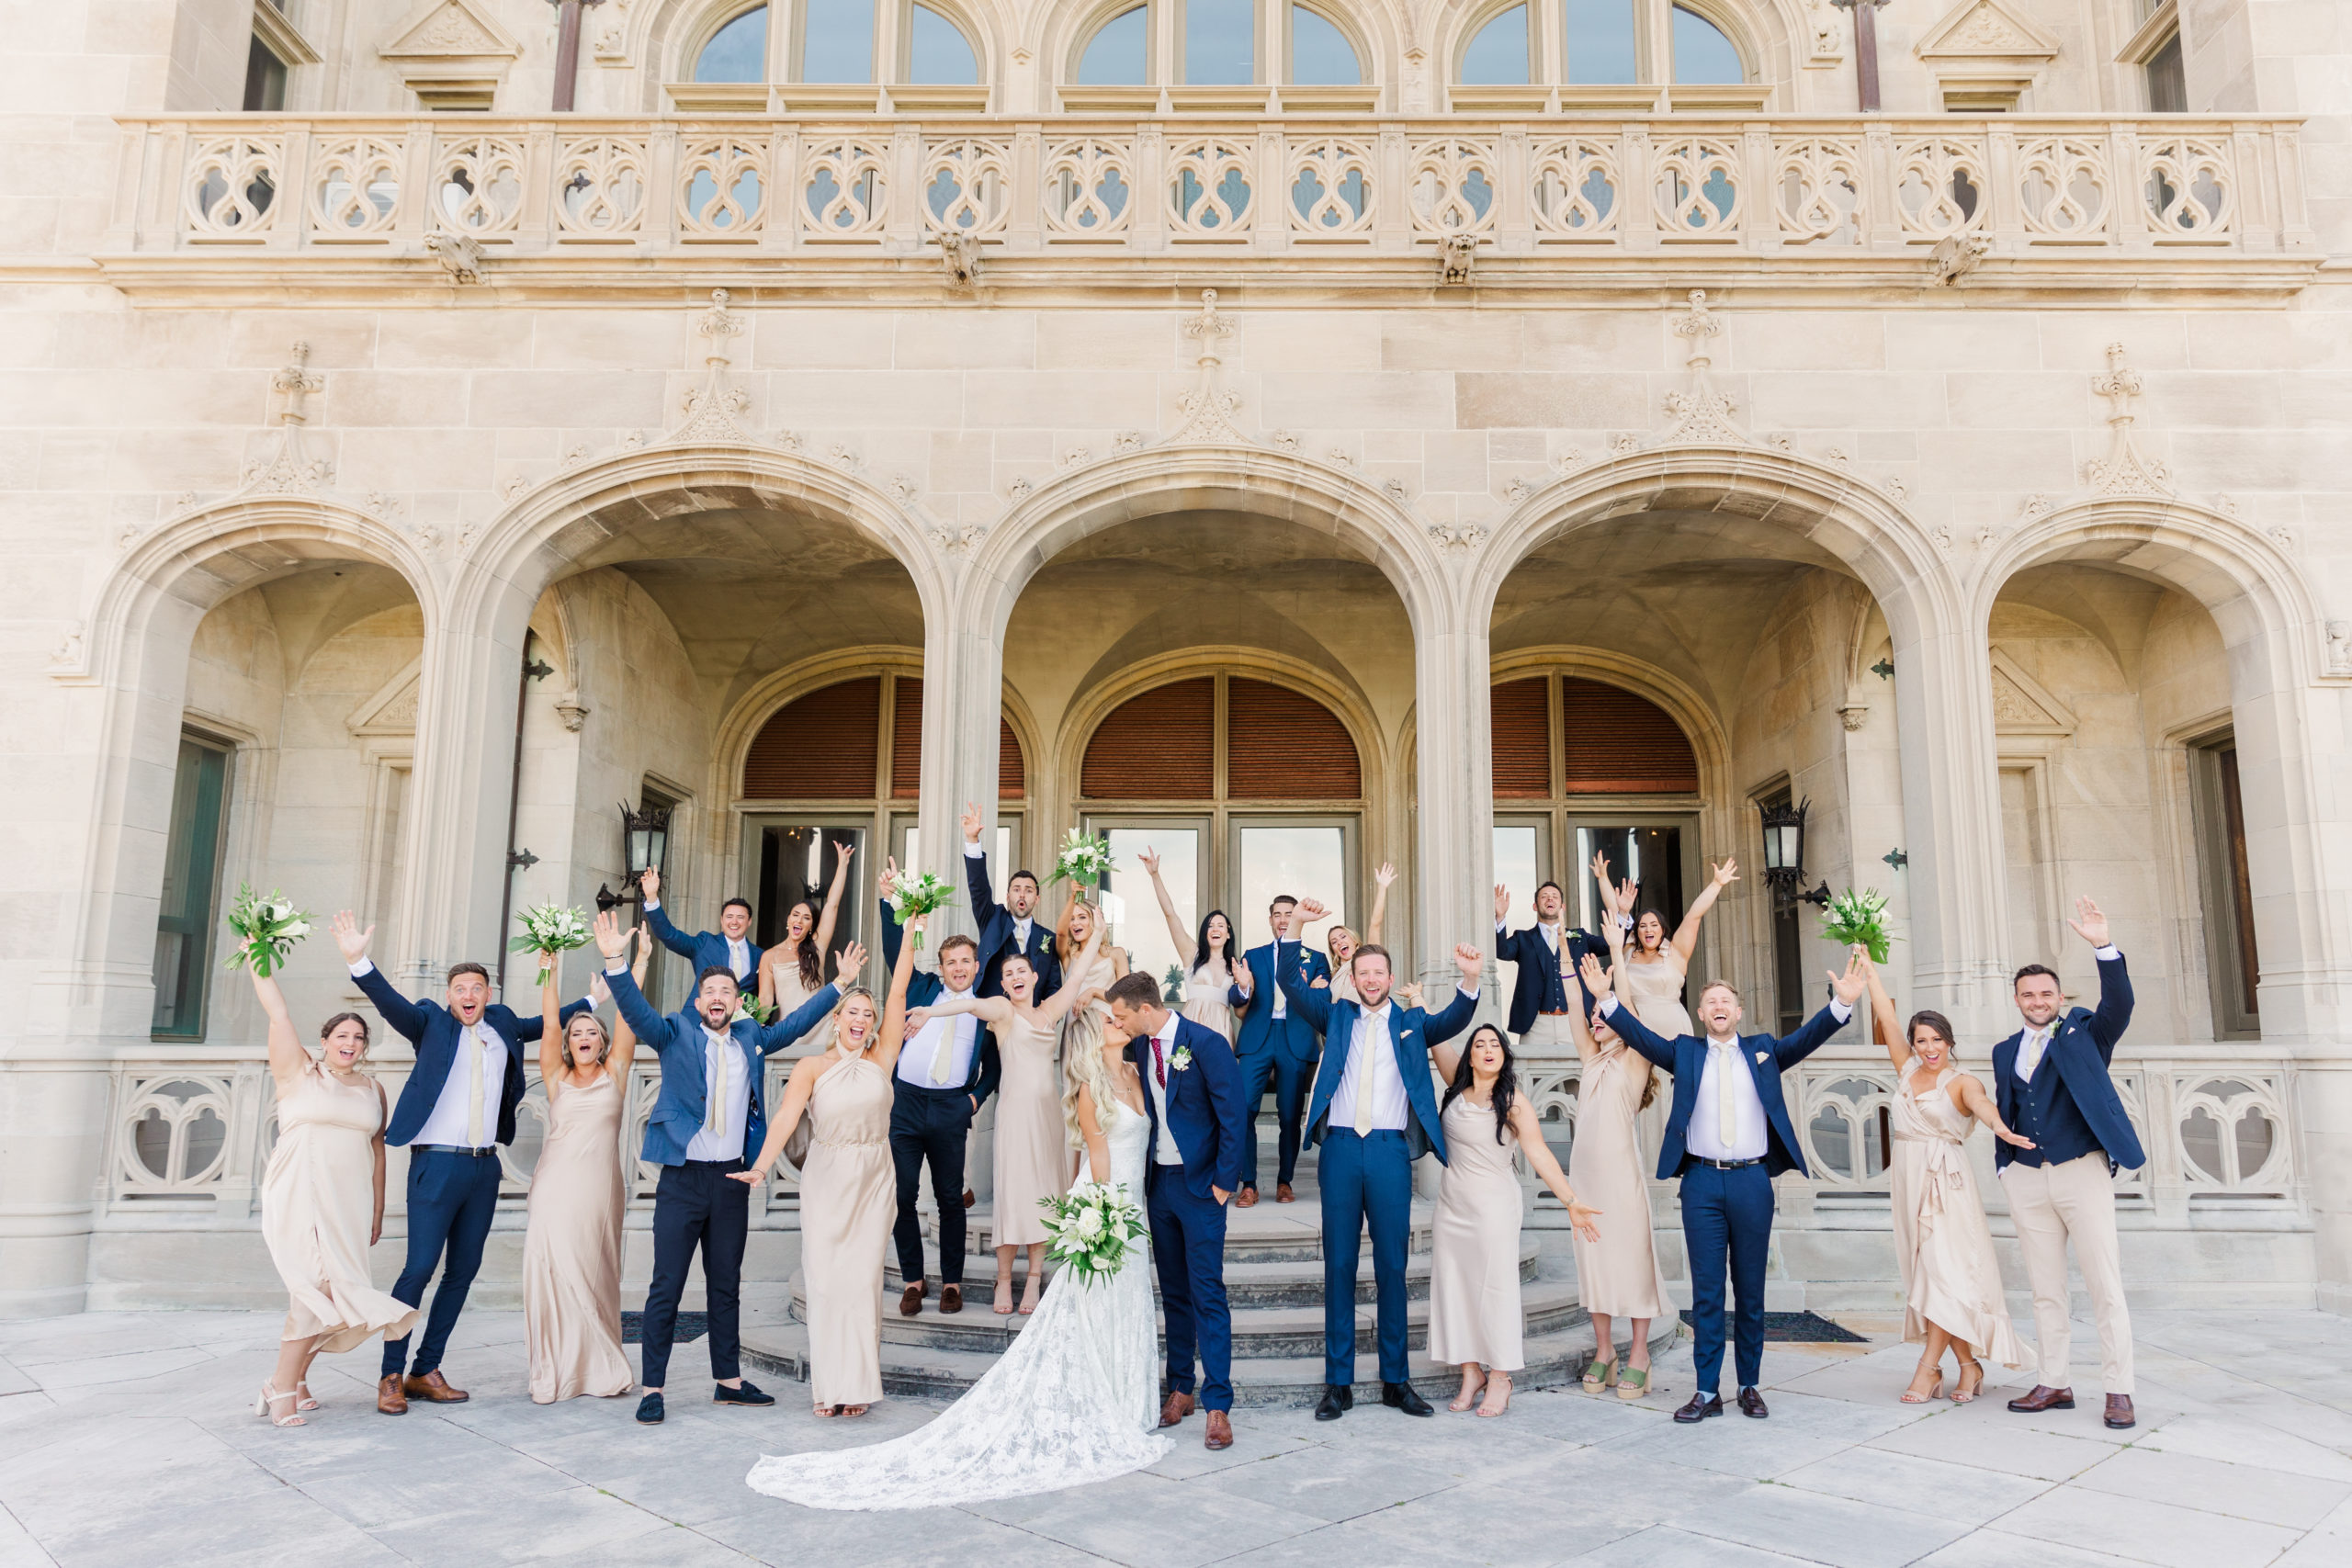 Bridal Party cheers for the bride and groom on the steps of Ochre Court in Newport Rhode Island.